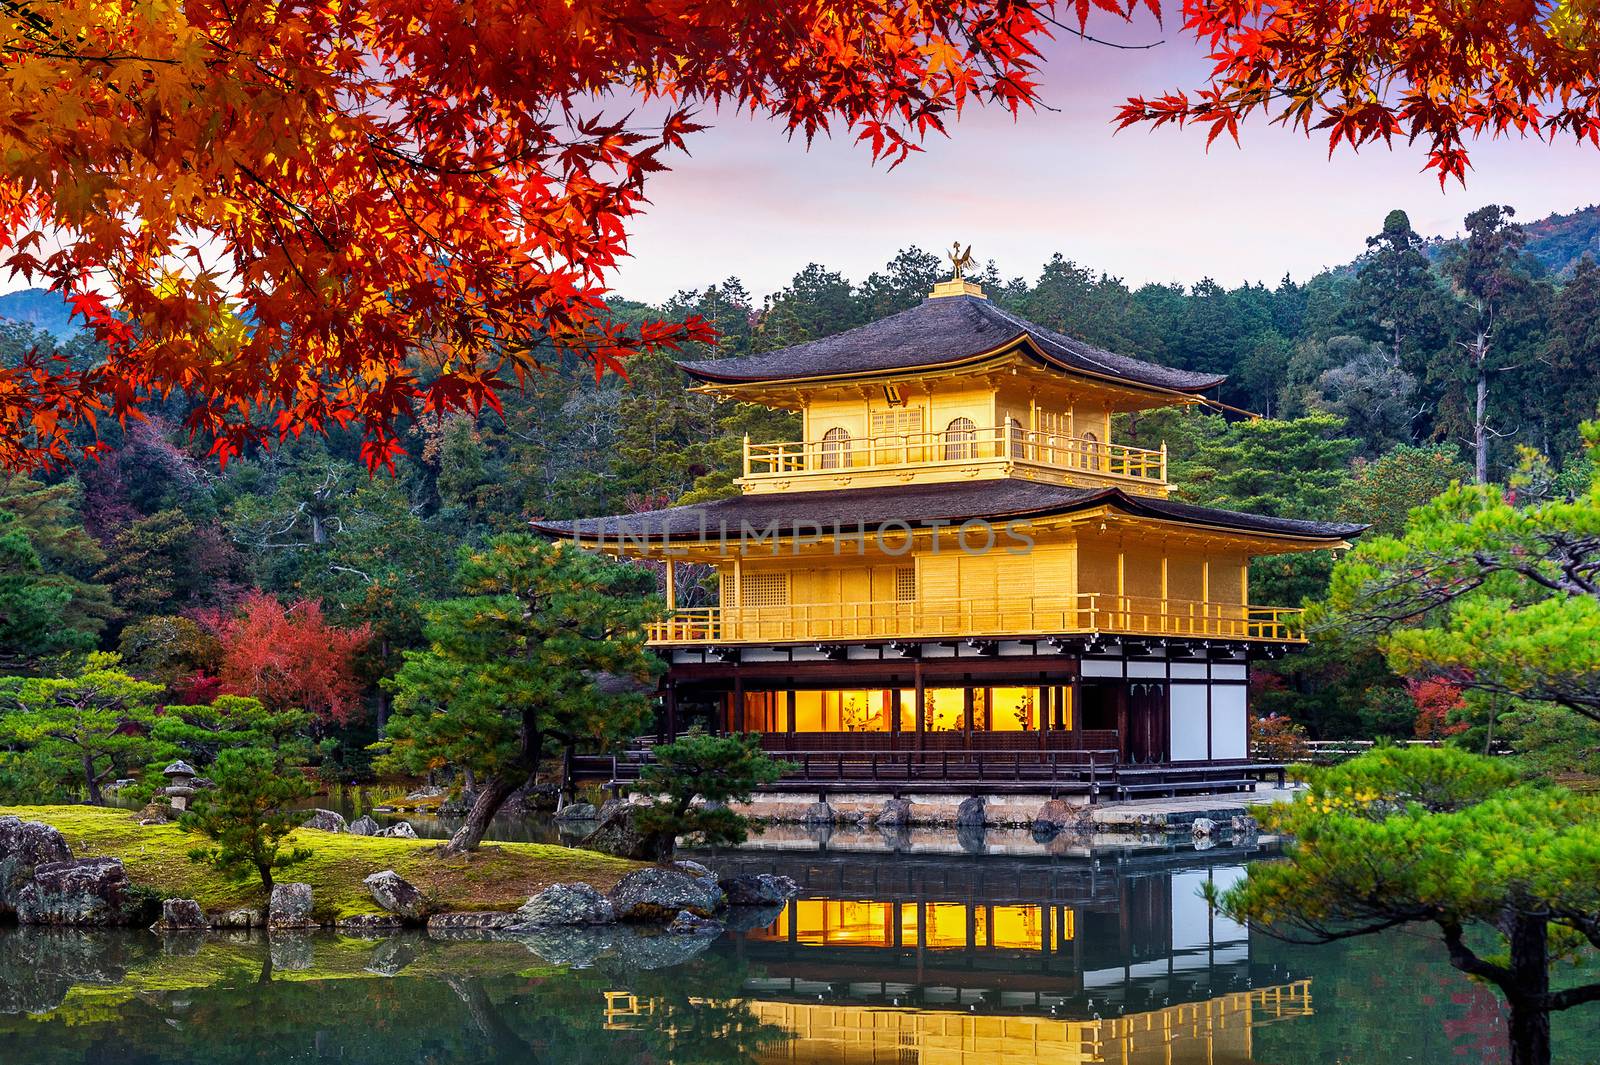 The Golden Pavilion. Kinkakuji Temple in autumn, Kyoto in Japan. by gutarphotoghaphy